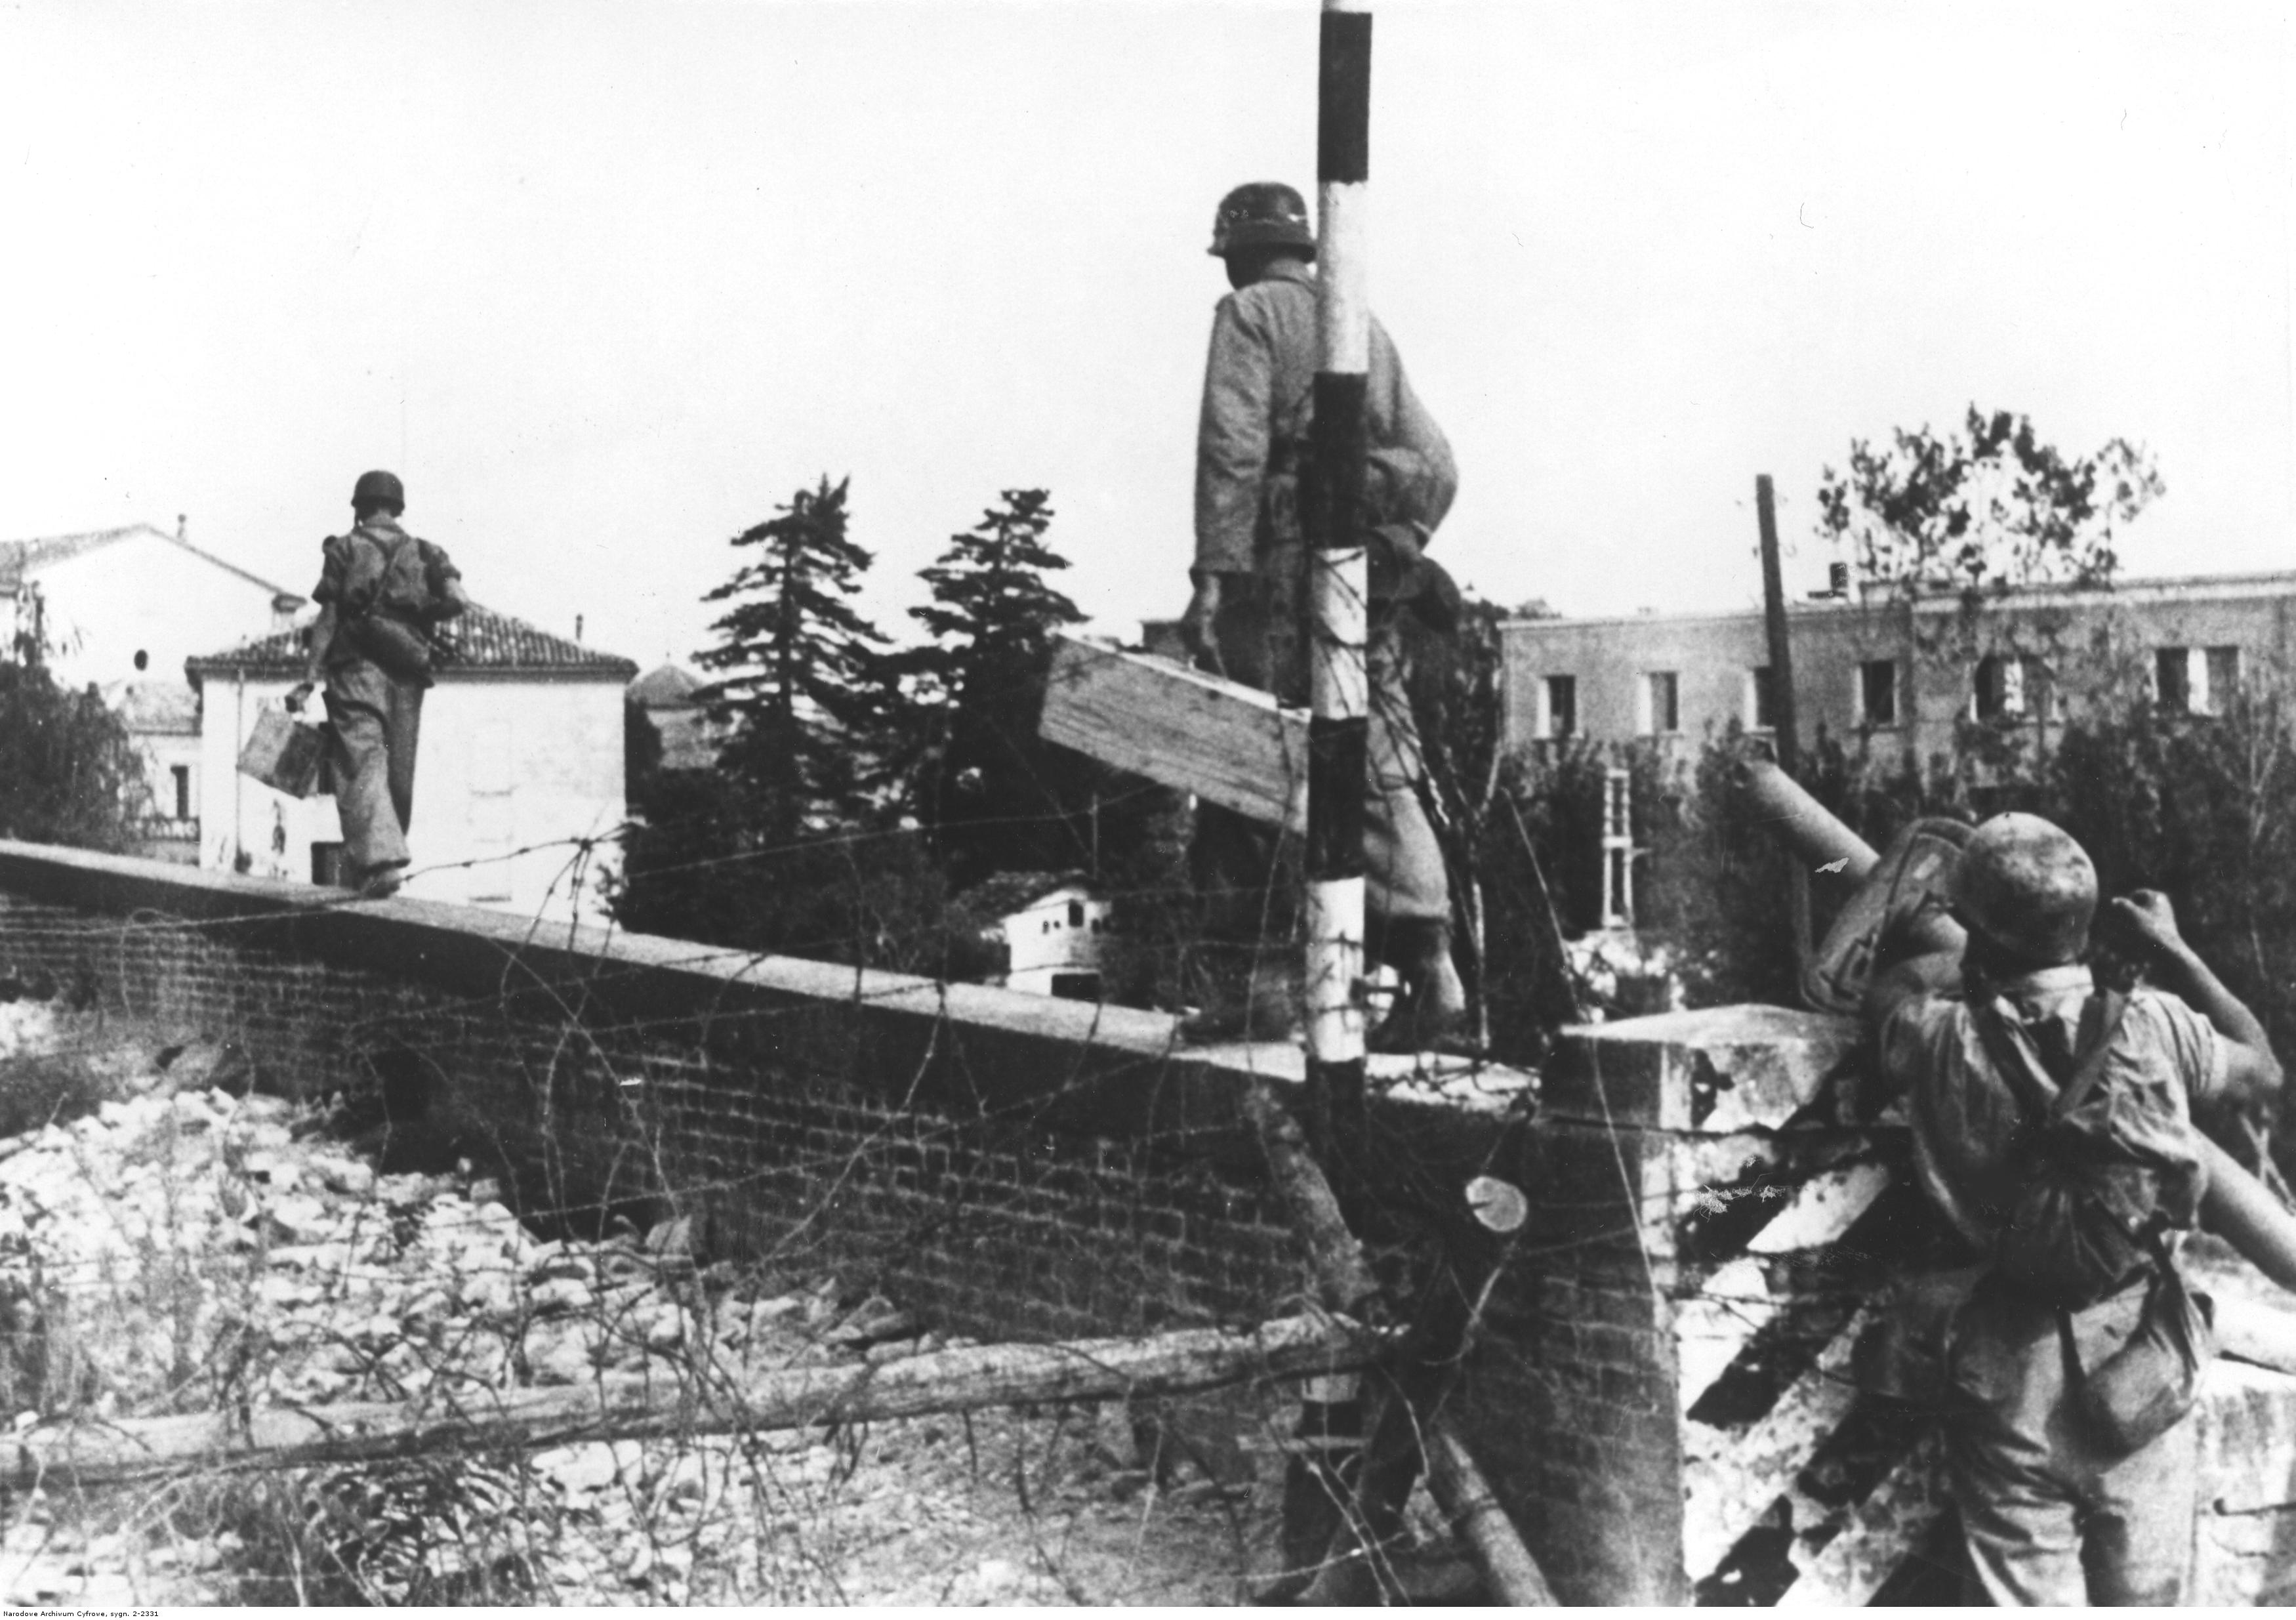 German soldiers in Poland, Sep 1944; note Panzerschreck weapon being lifted up to the wall